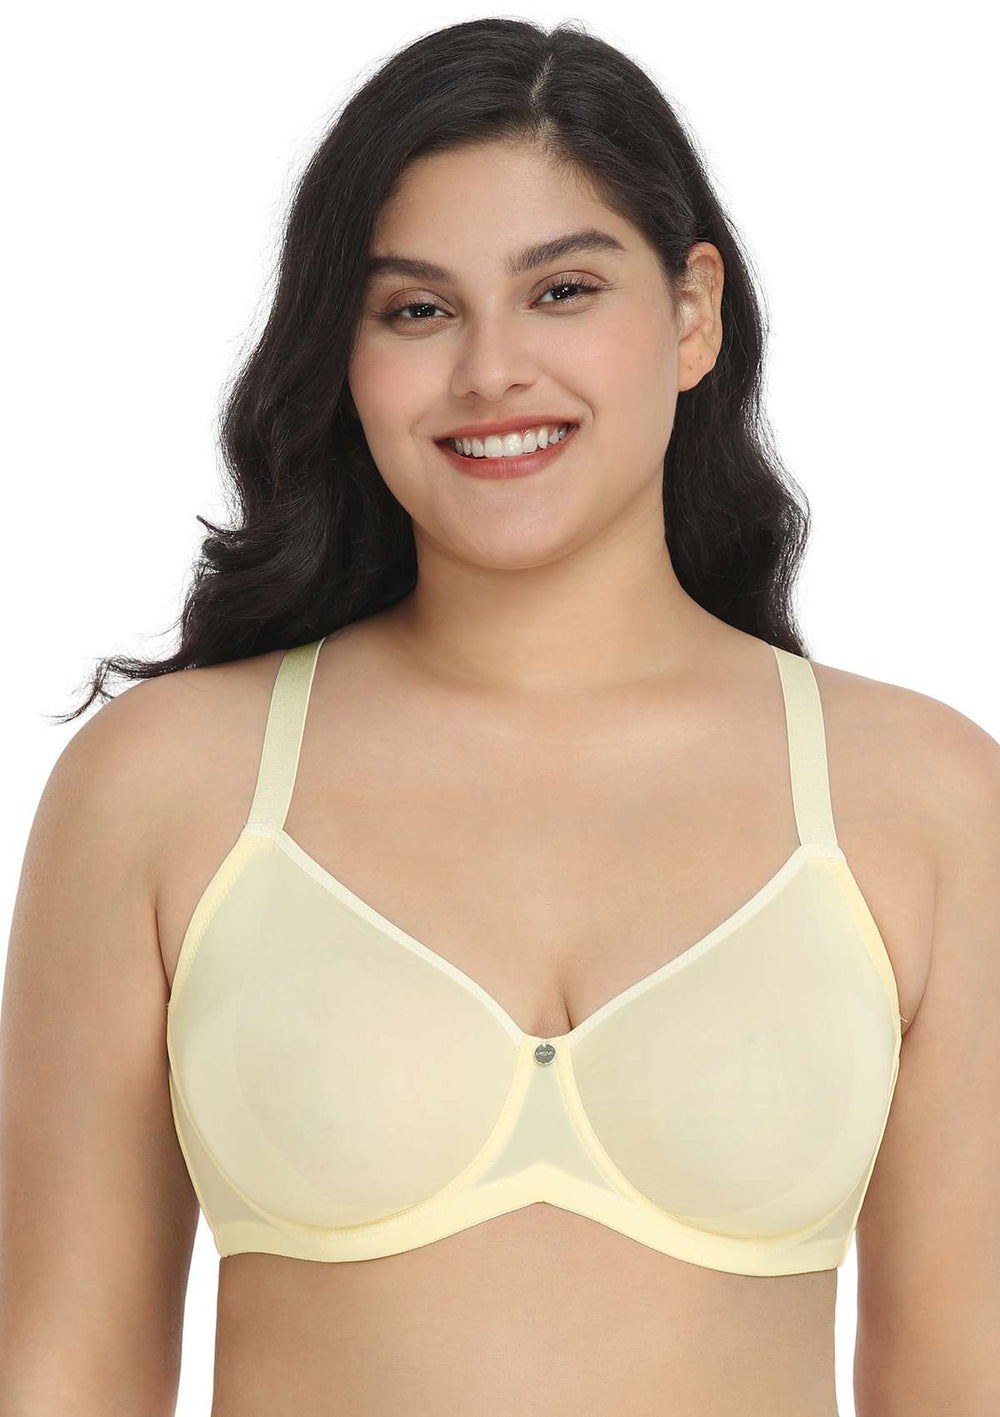 HSIA Joan Soft T-shirt Unlined Non-Padded Soft Cup Minimizer Bra